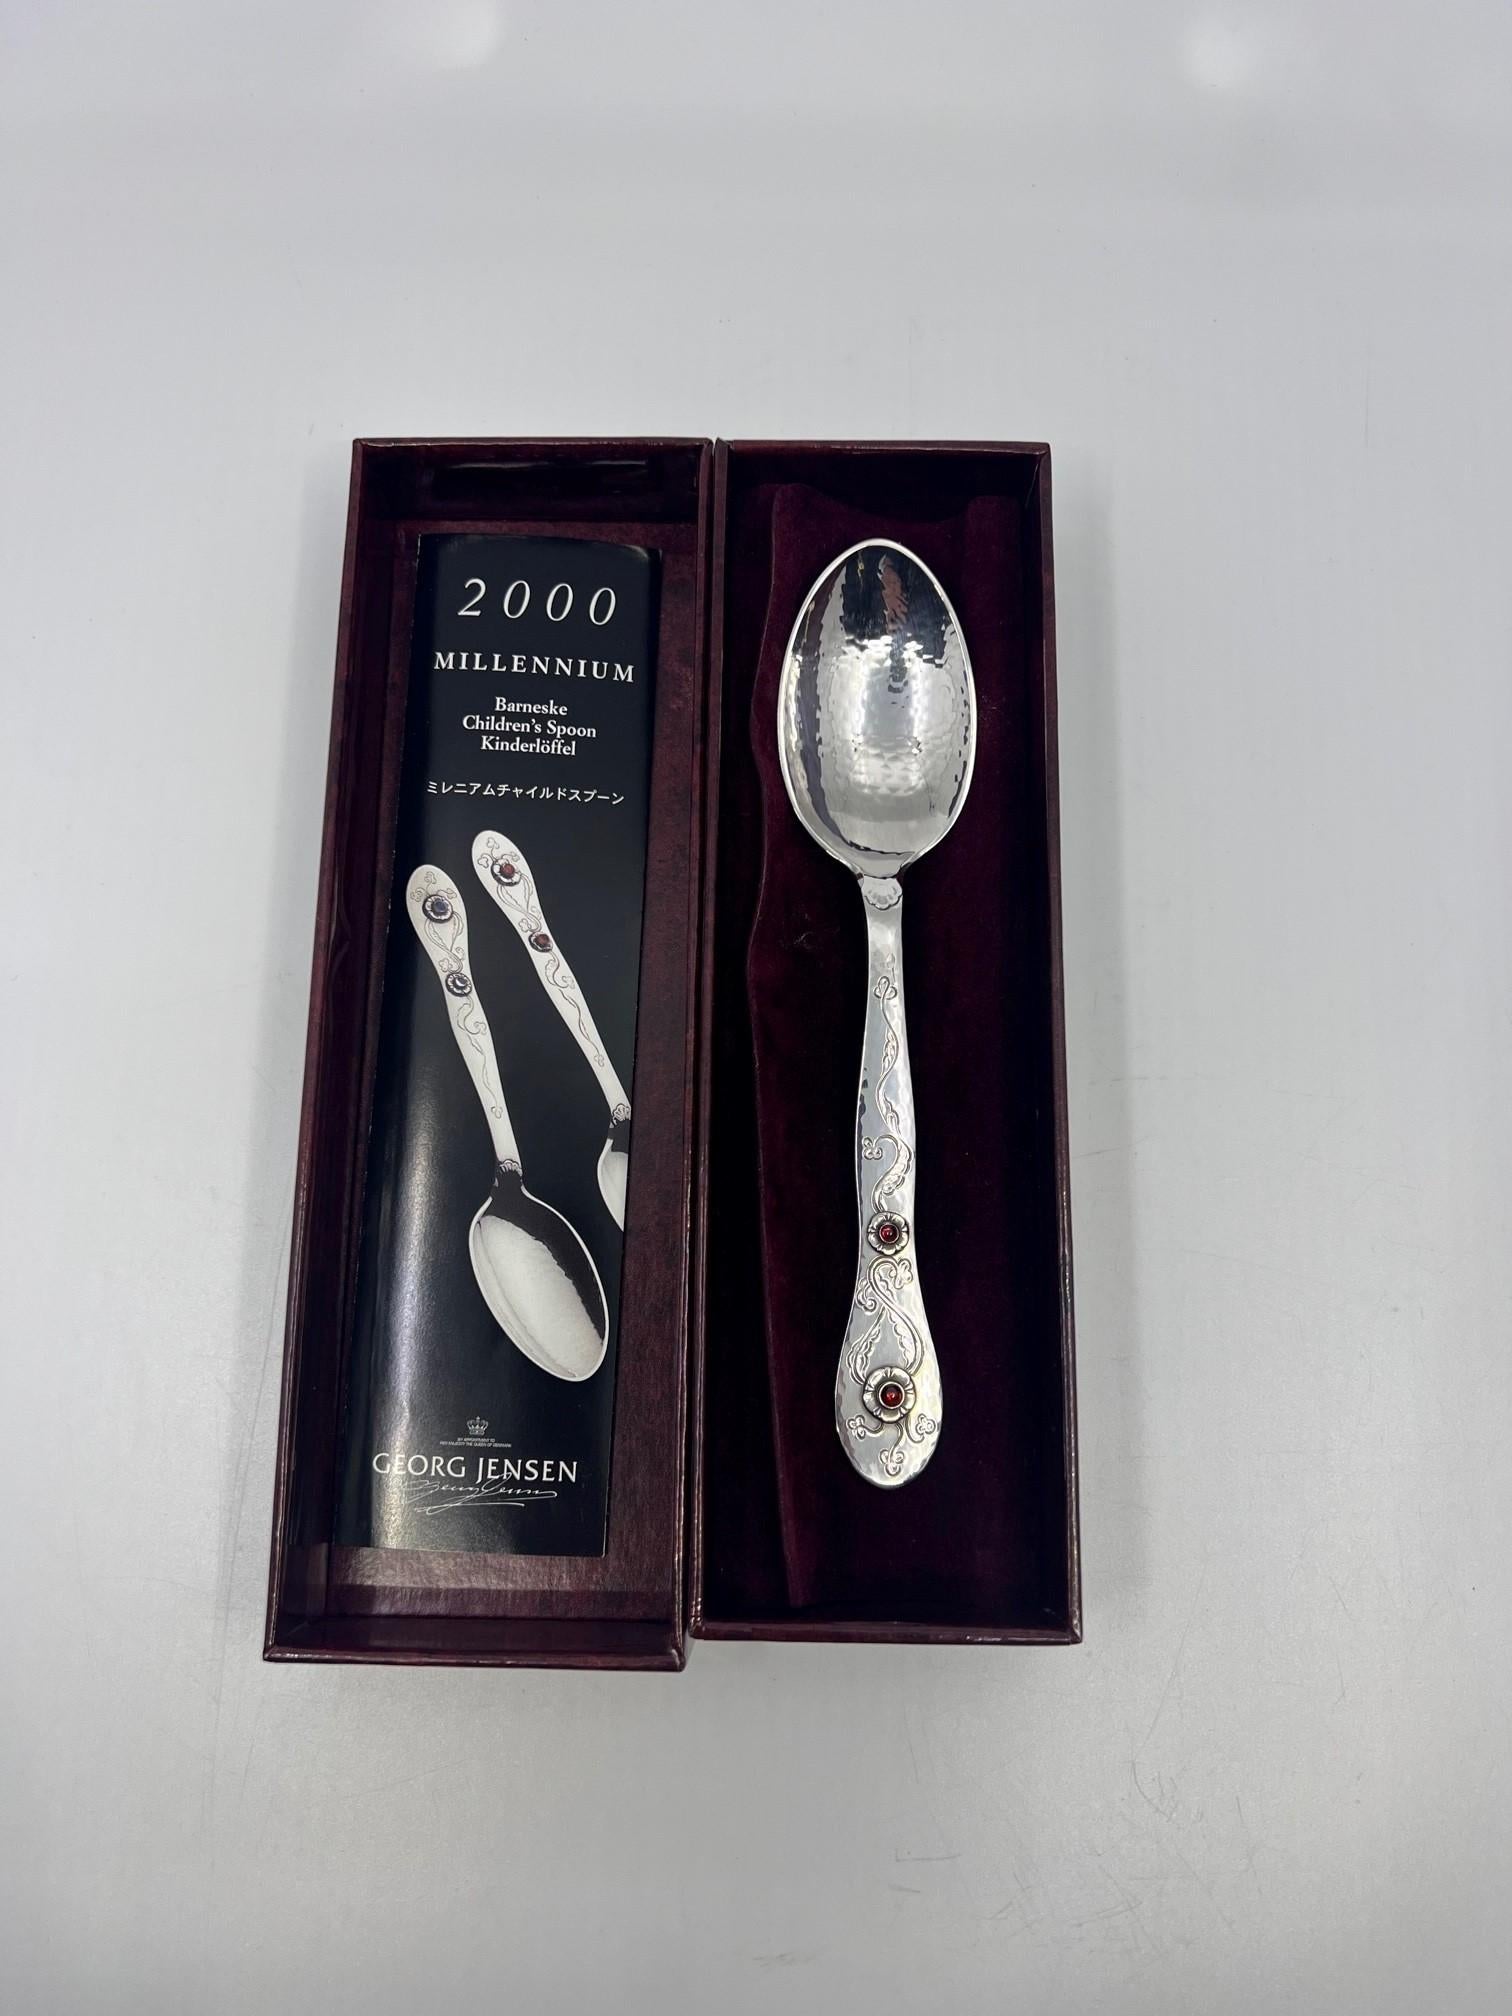 A Georg Jensen sterling silver 2000 Millennium spoon, with two set red garnet stones. New in the box along with the original brochure. This spoon was handcrafted in Denmark in 1999 and has a great deal of hand chasing.

Additional